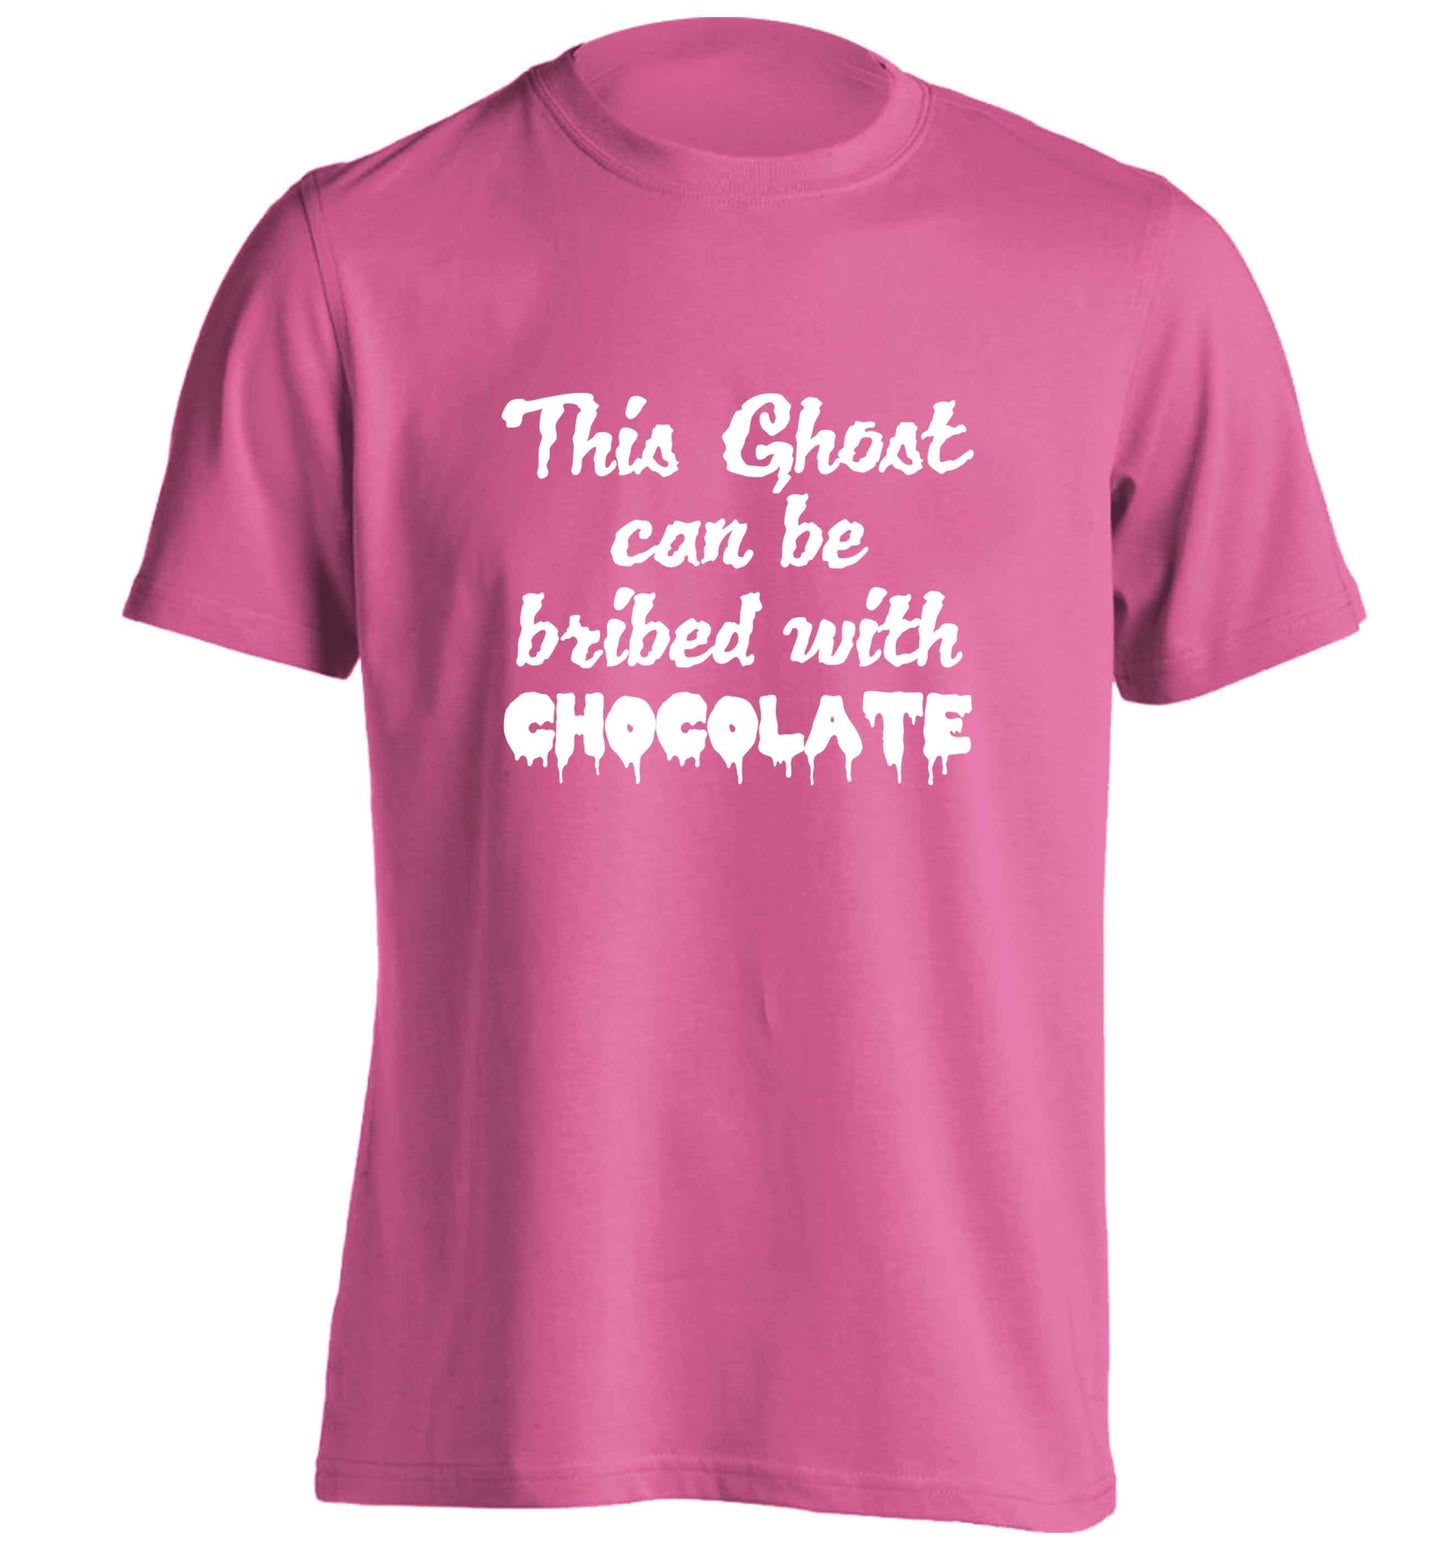 This ghost can be bribed with chocolate adults unisex pink Tshirt 2XL